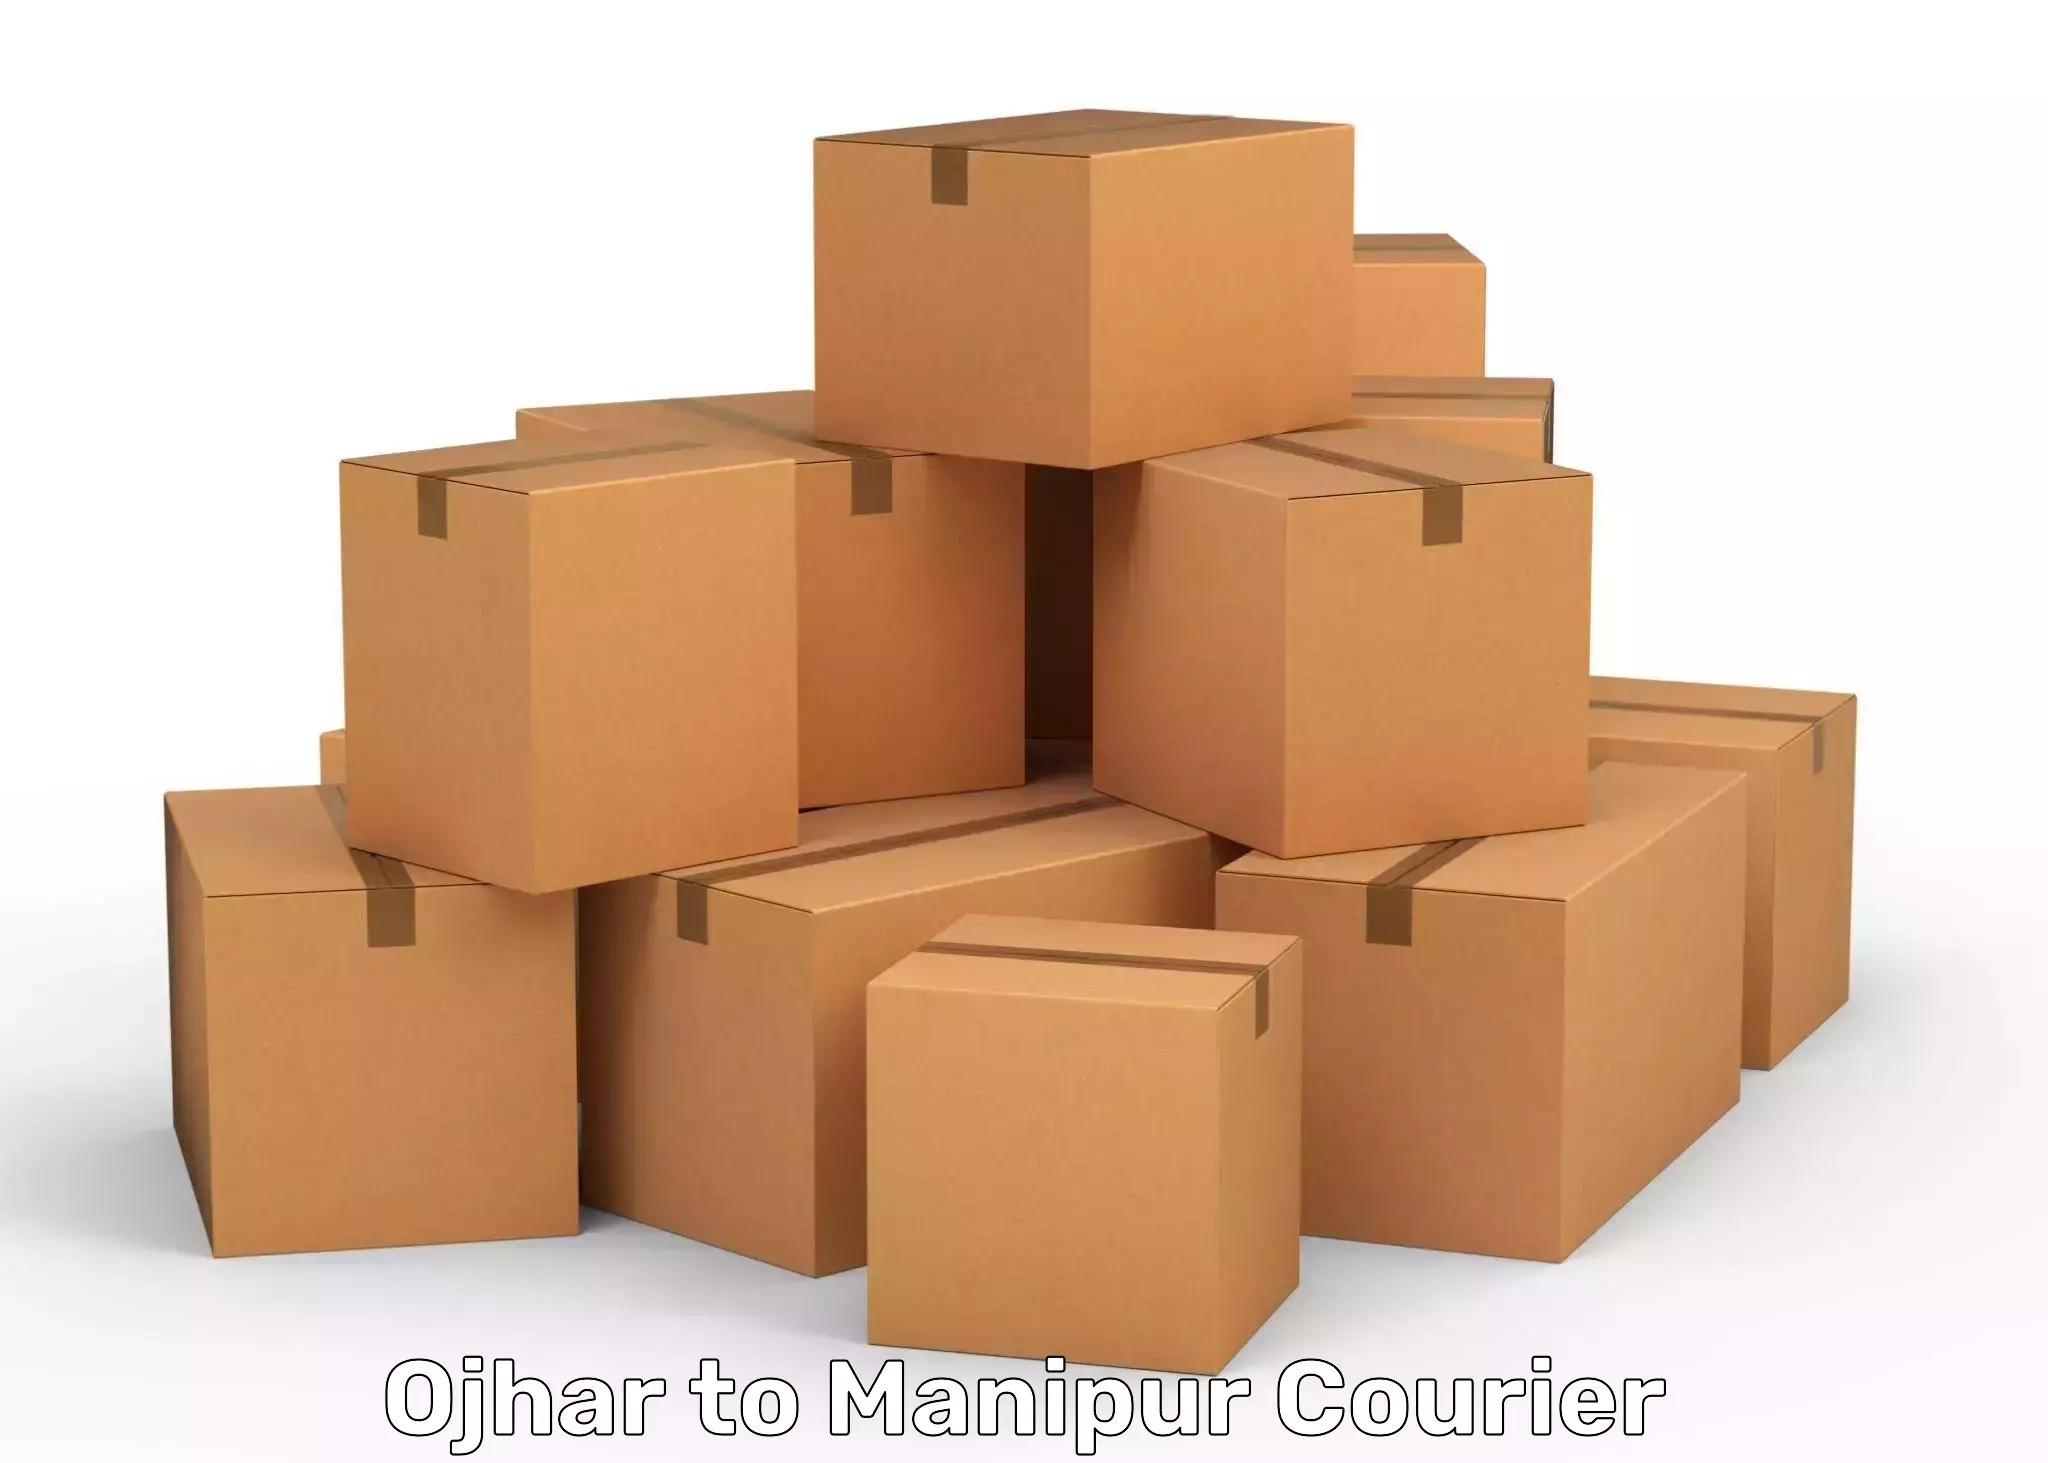 Full-service courier options Ojhar to Manipur